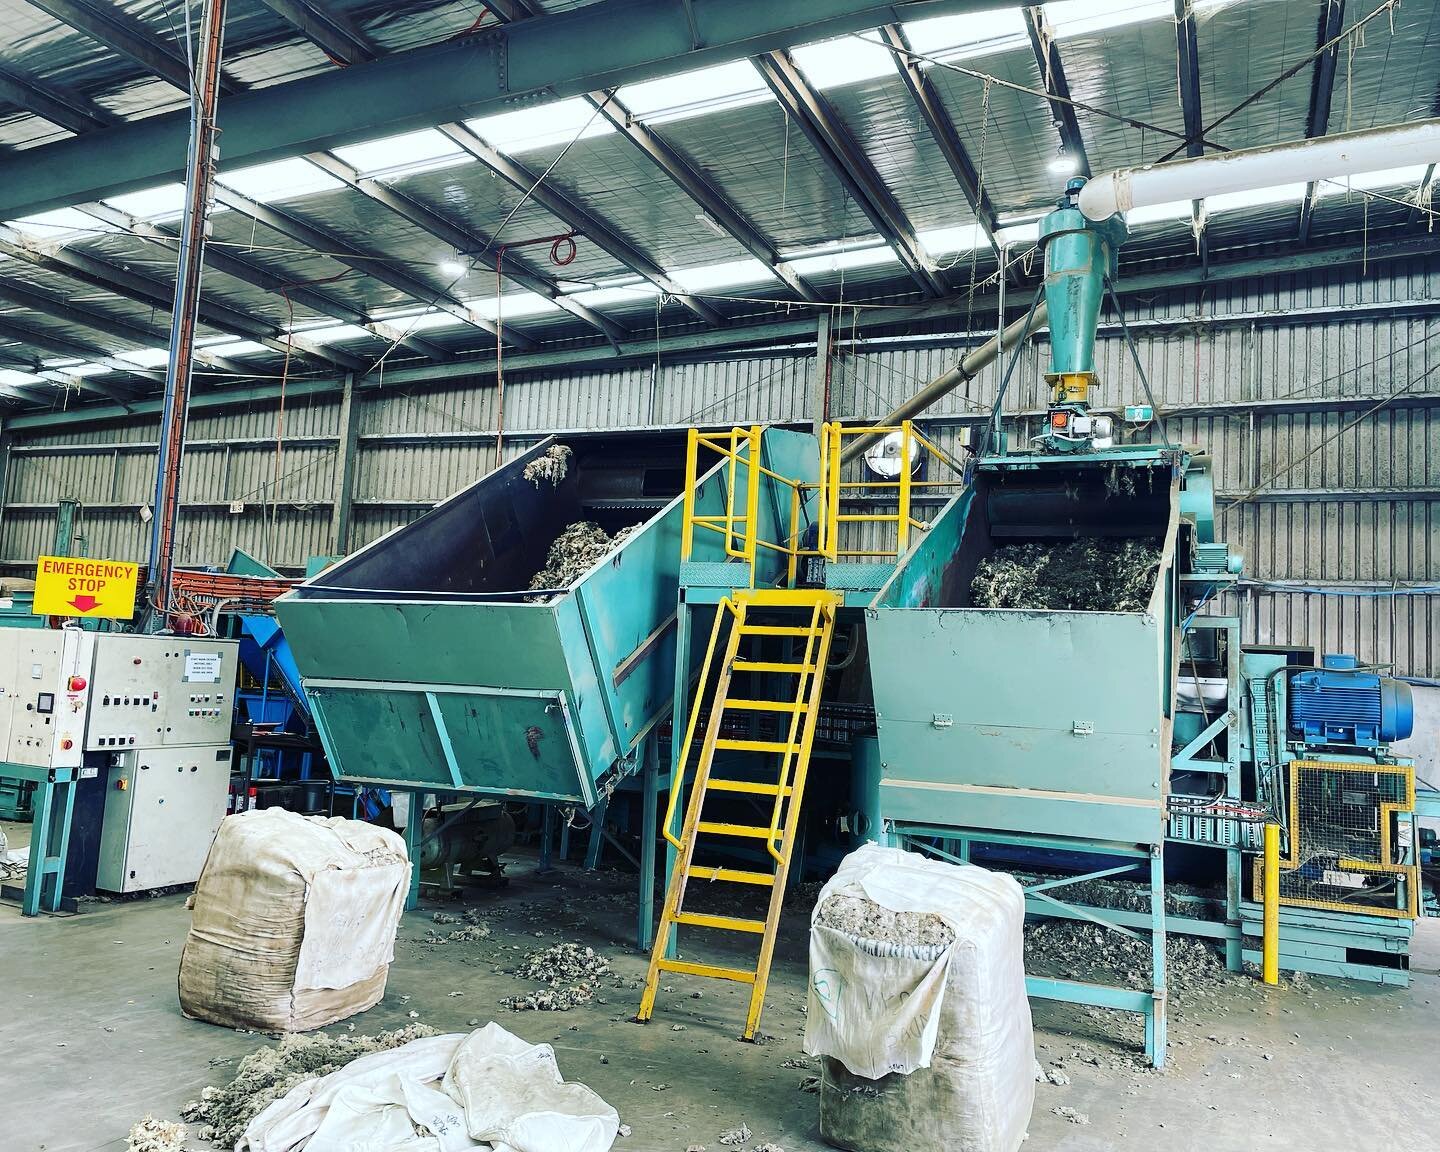 Value adding! We will also seek ways to add value to our products before they&rsquo;re exported around the globe. Also passionate about supporting local manufacturing. Another upside is getting to see these machines working!
#merino #manufacturing #e